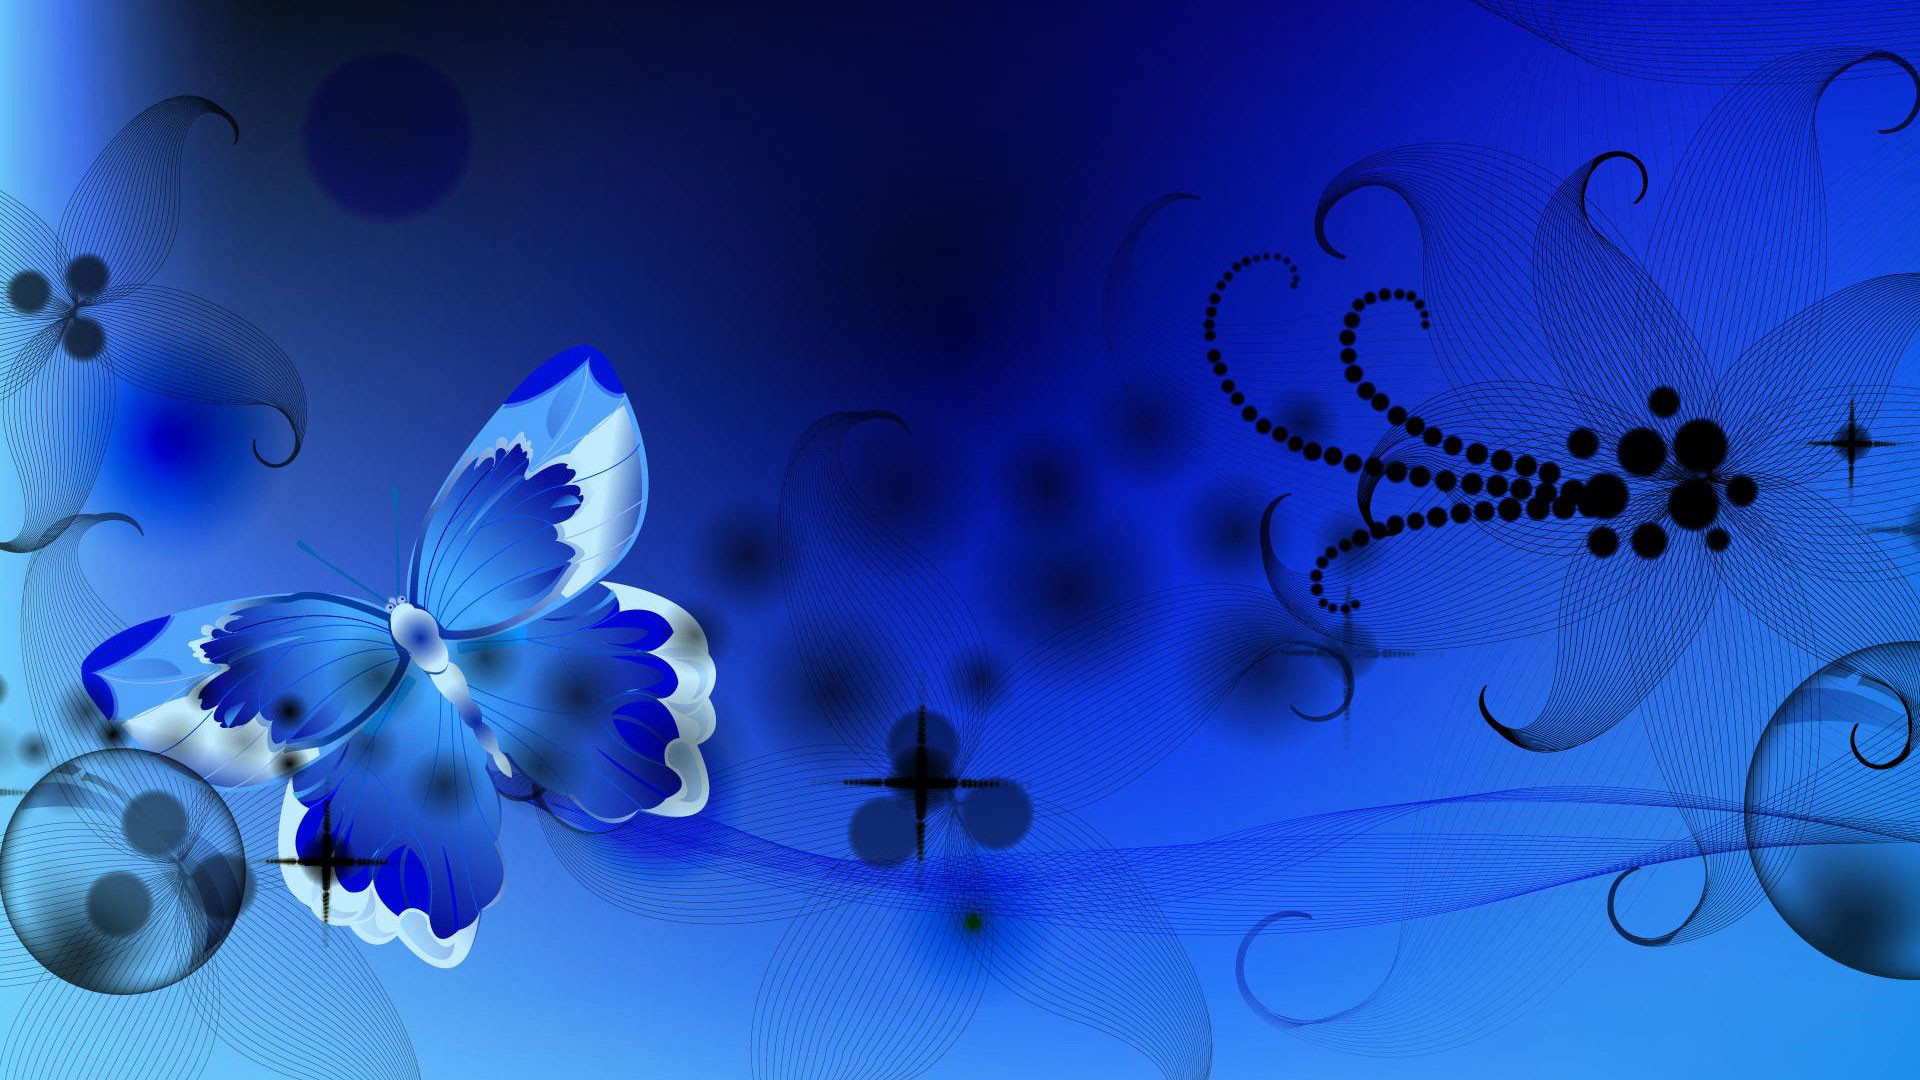 1920x1080 hd pics photos abstract blue 3d butterfly animated hd quality desktop  background wallpaper